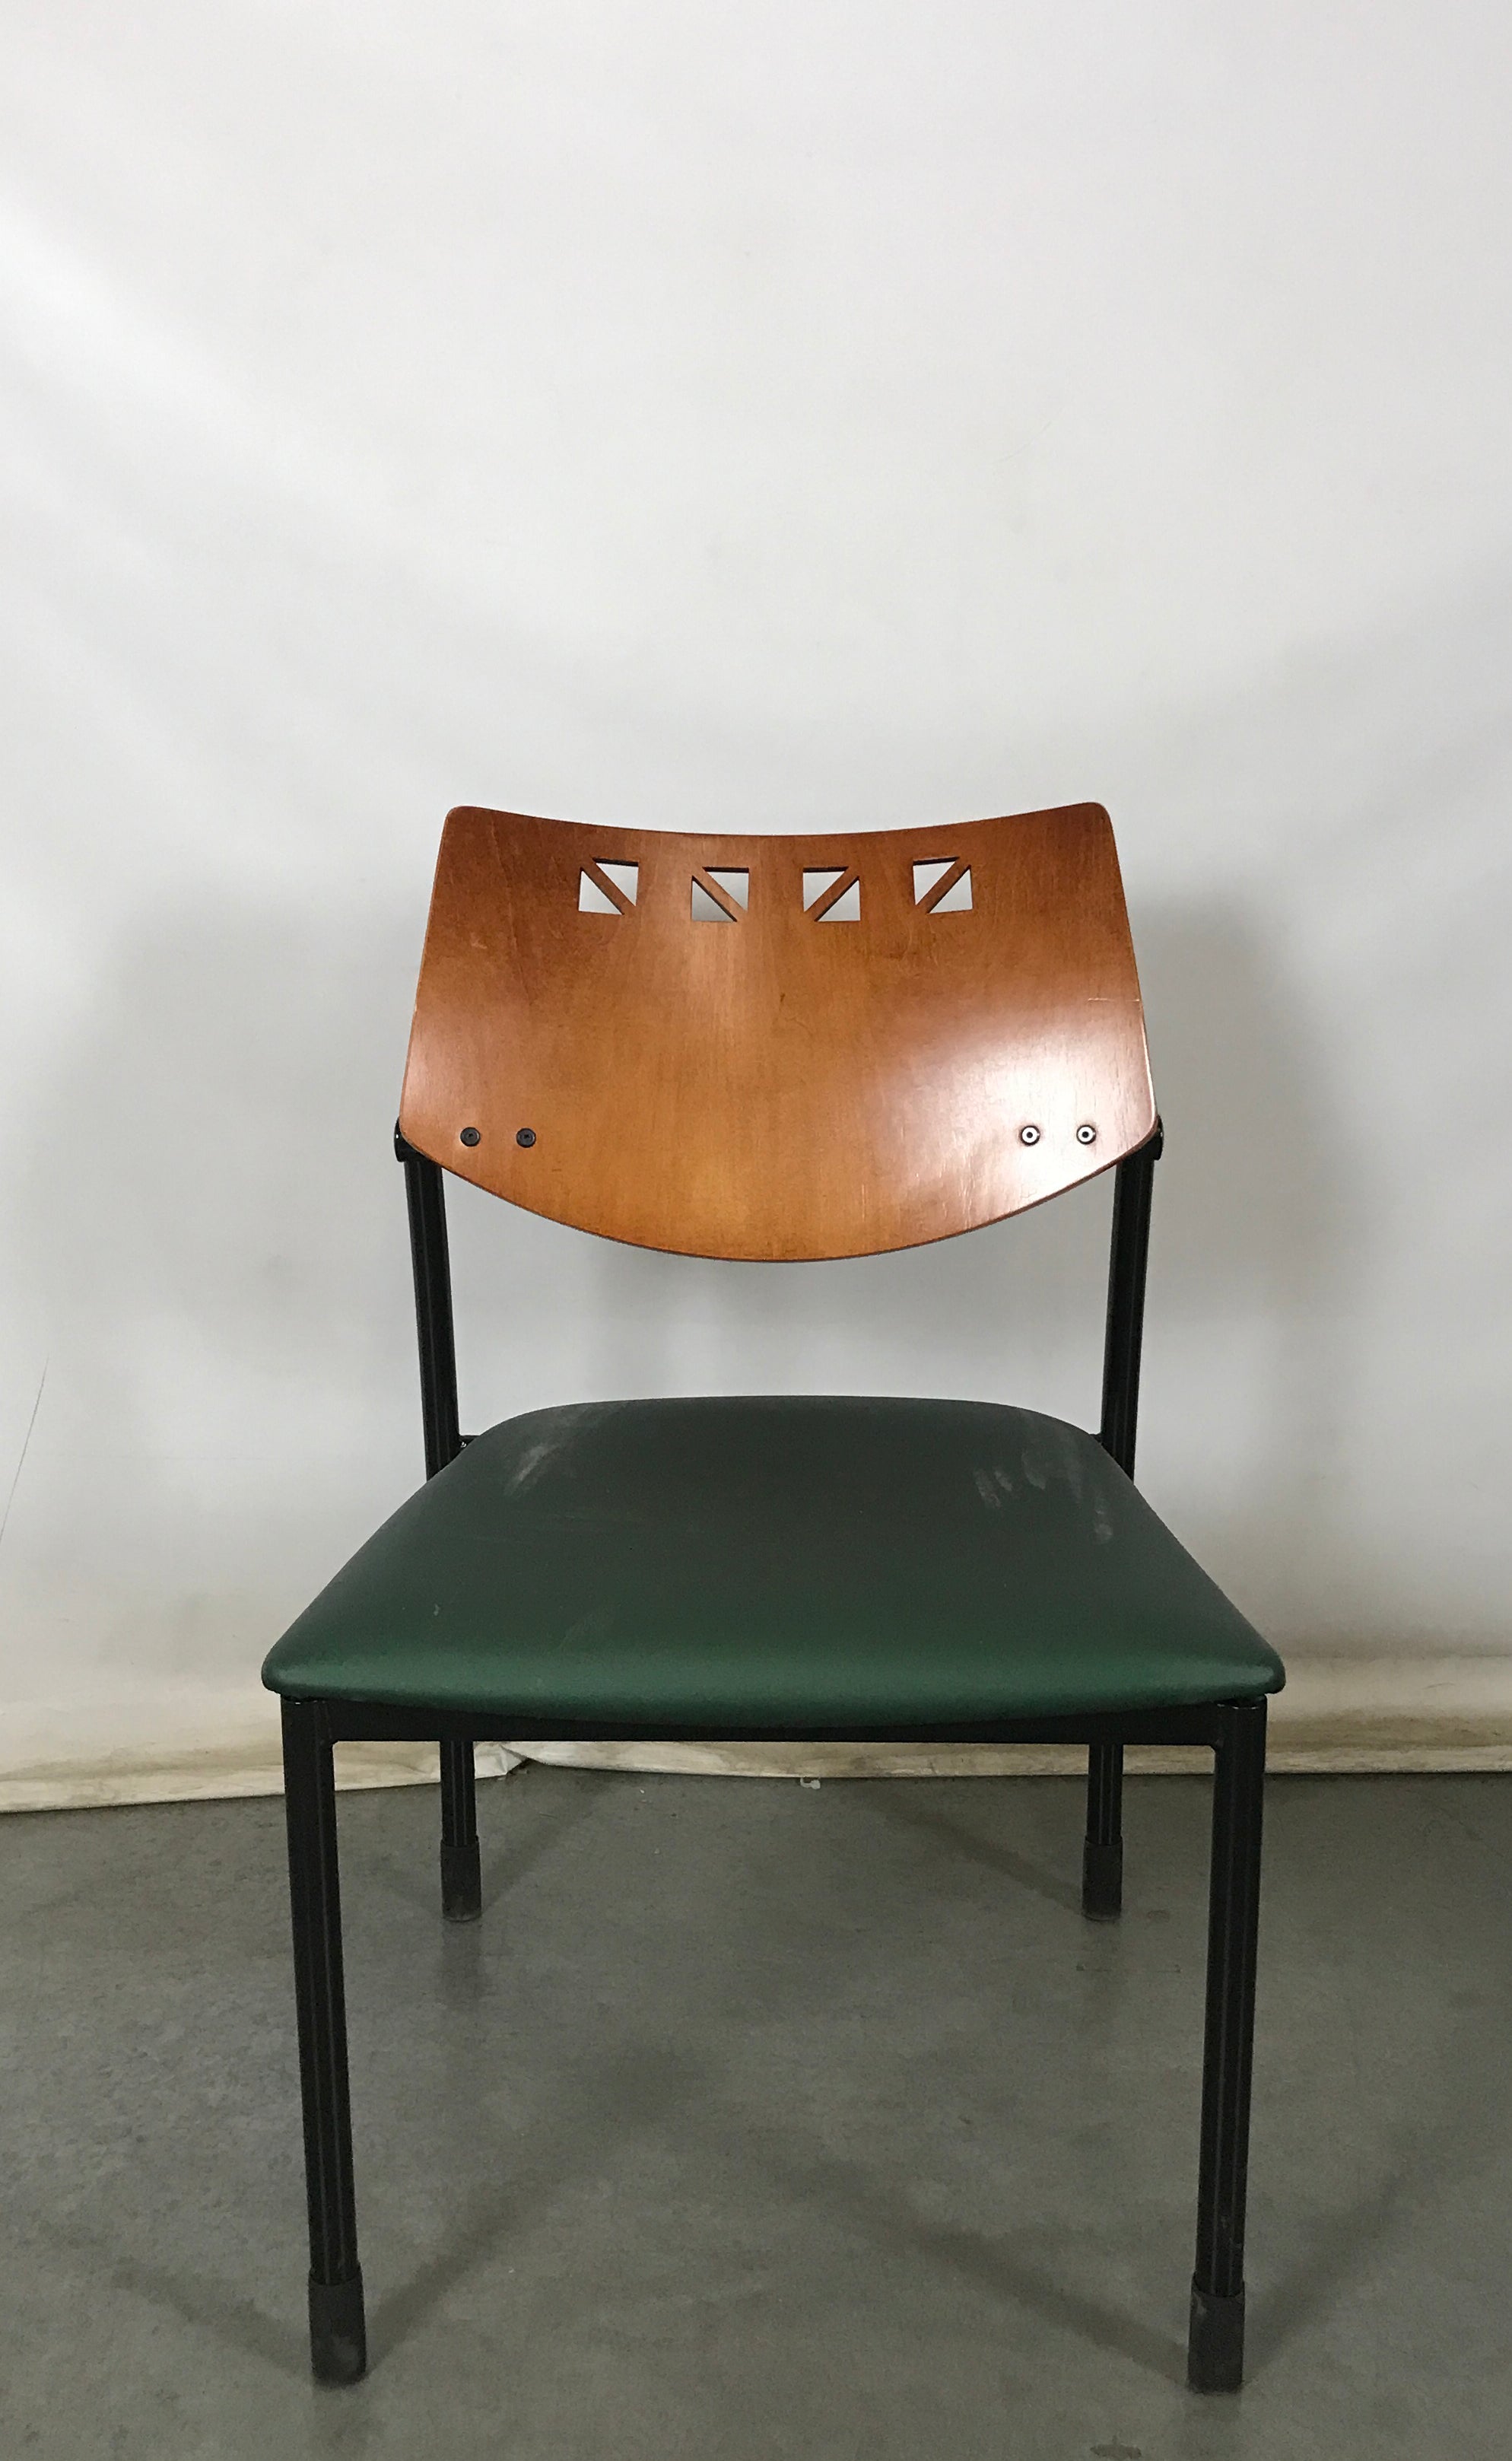 Green Plump Chair with Wooden Back